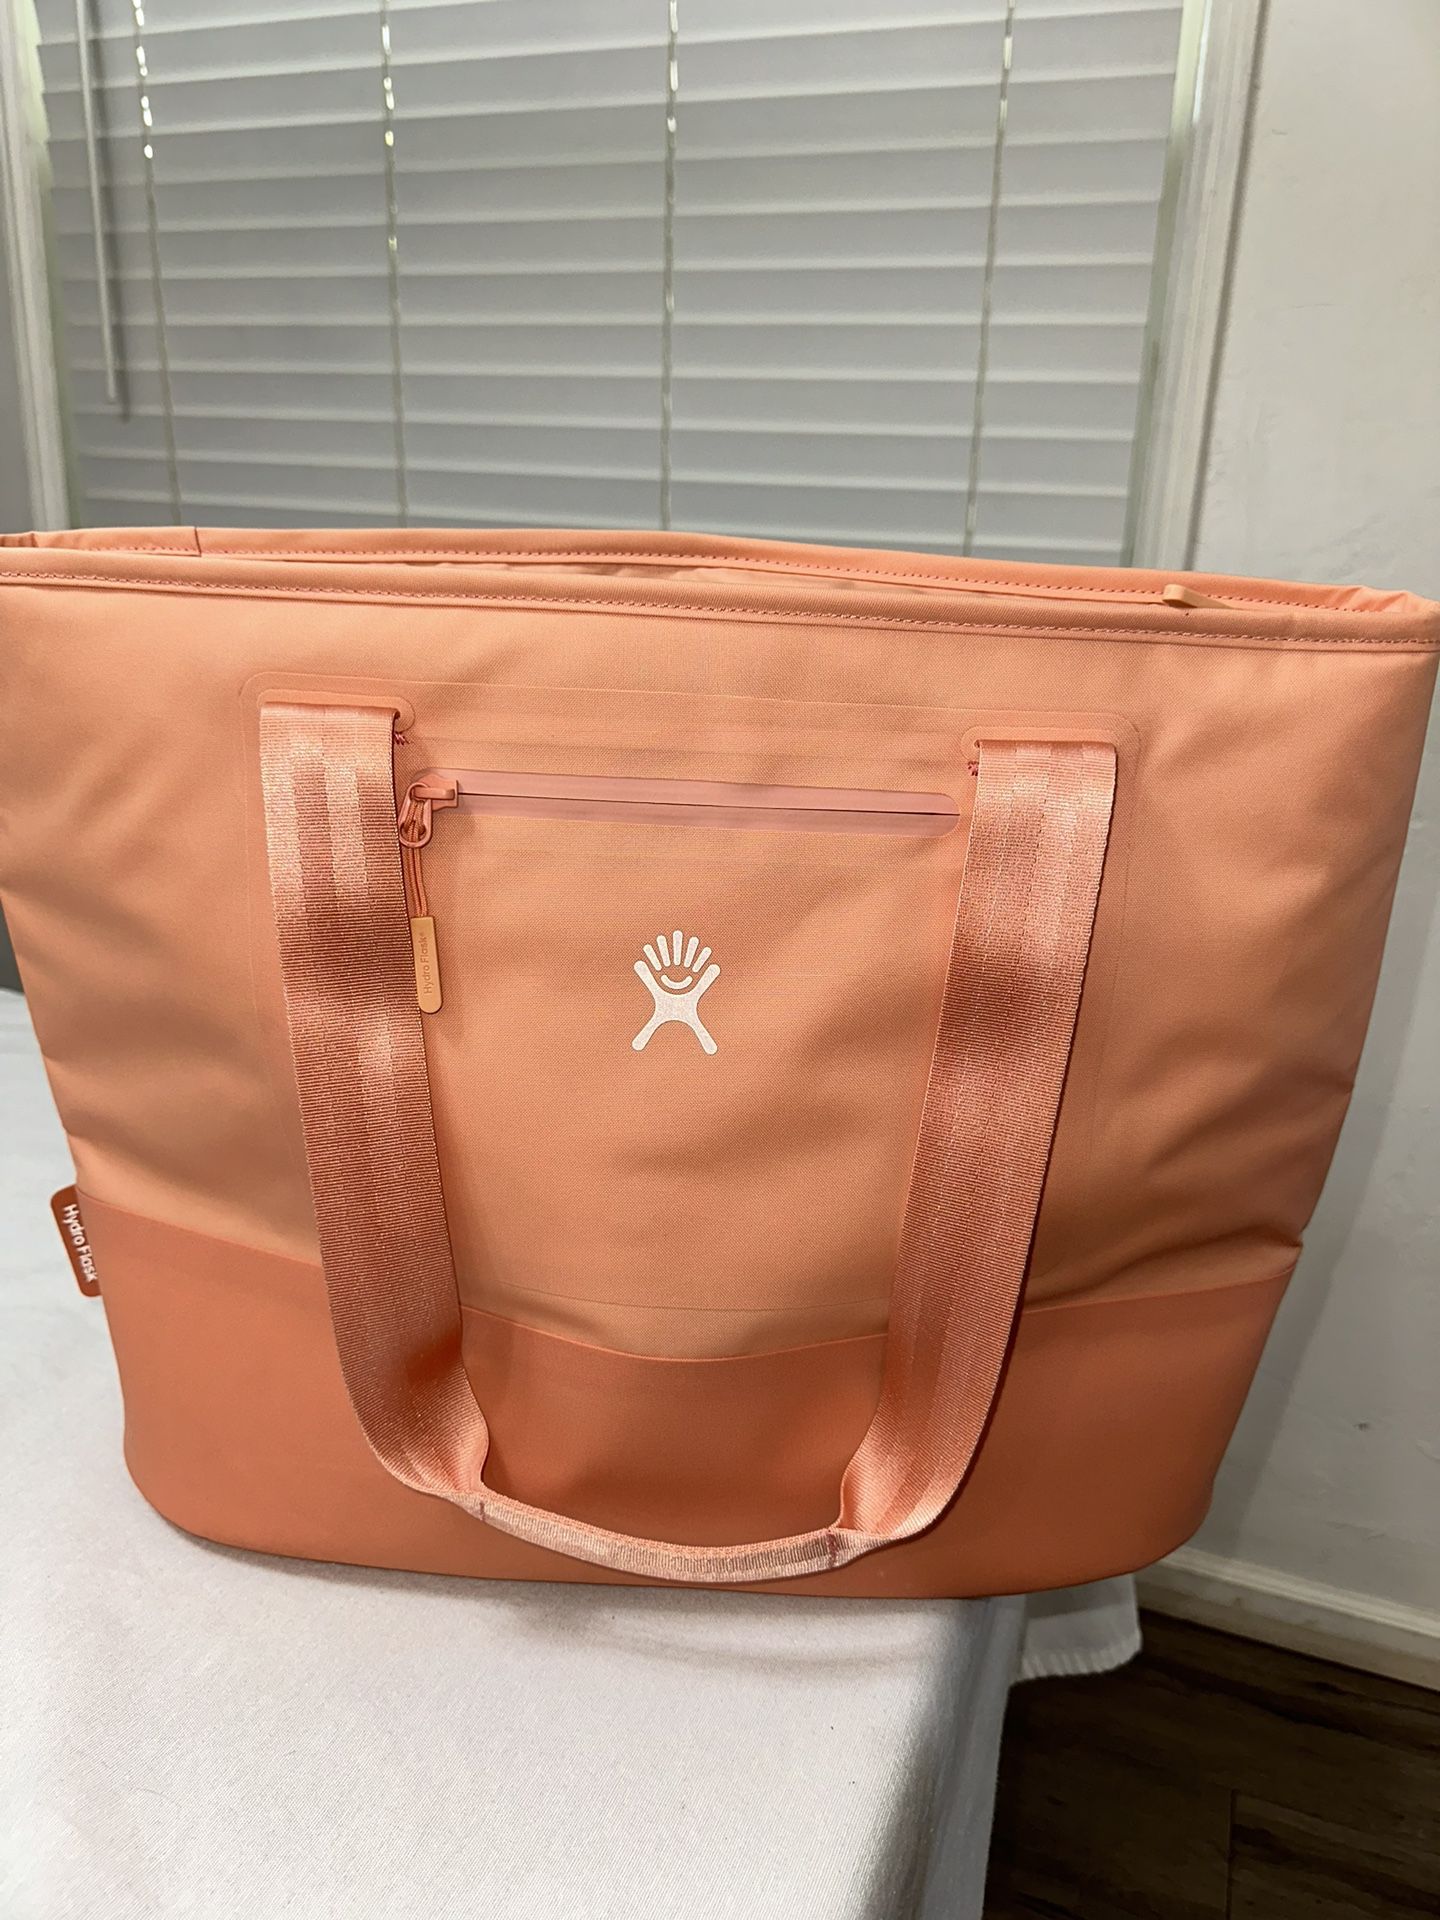 Hydro Flask Large Cooler Tote 